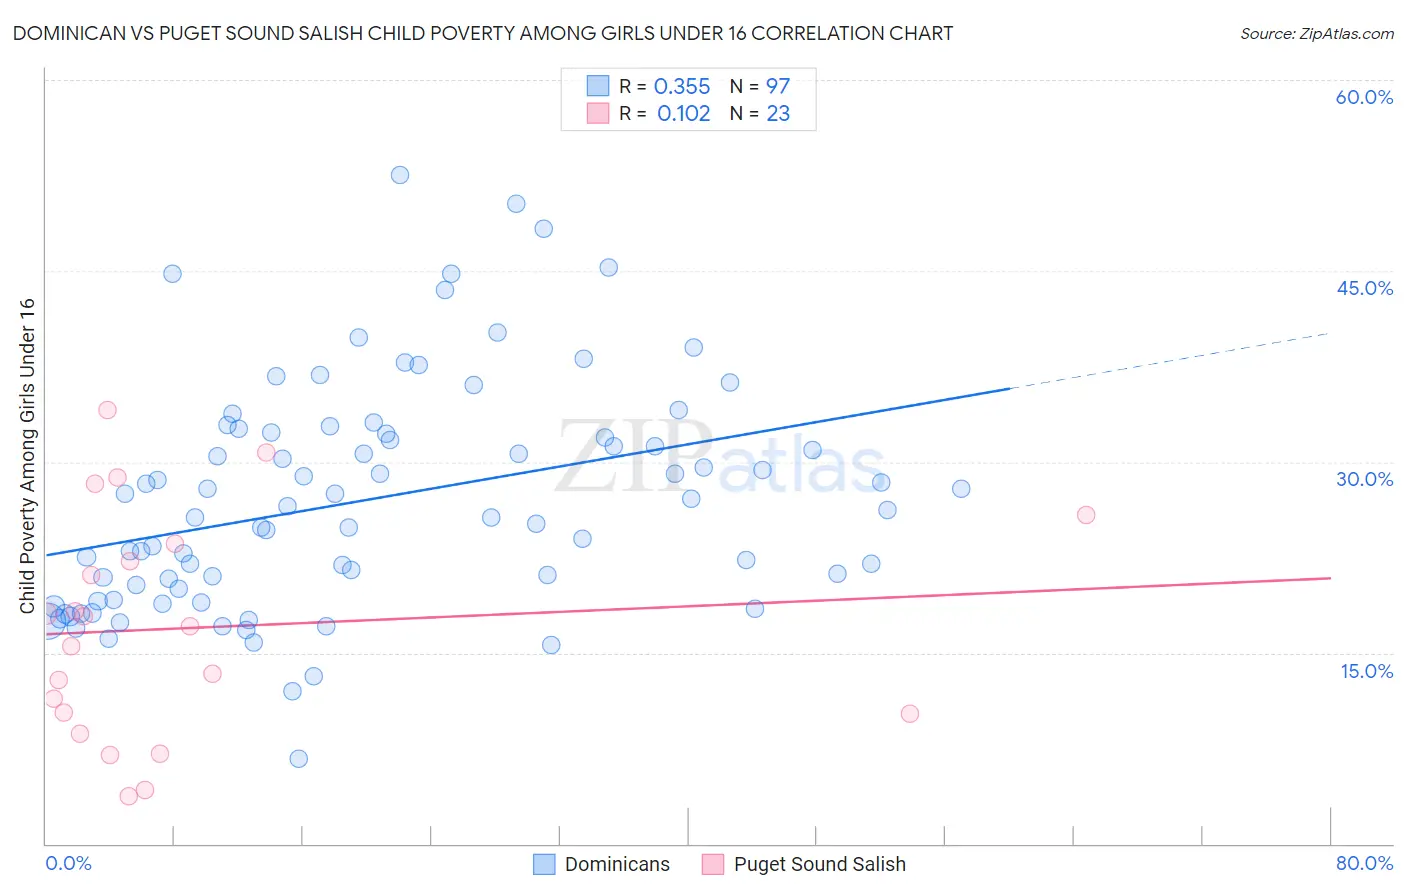 Dominican vs Puget Sound Salish Child Poverty Among Girls Under 16